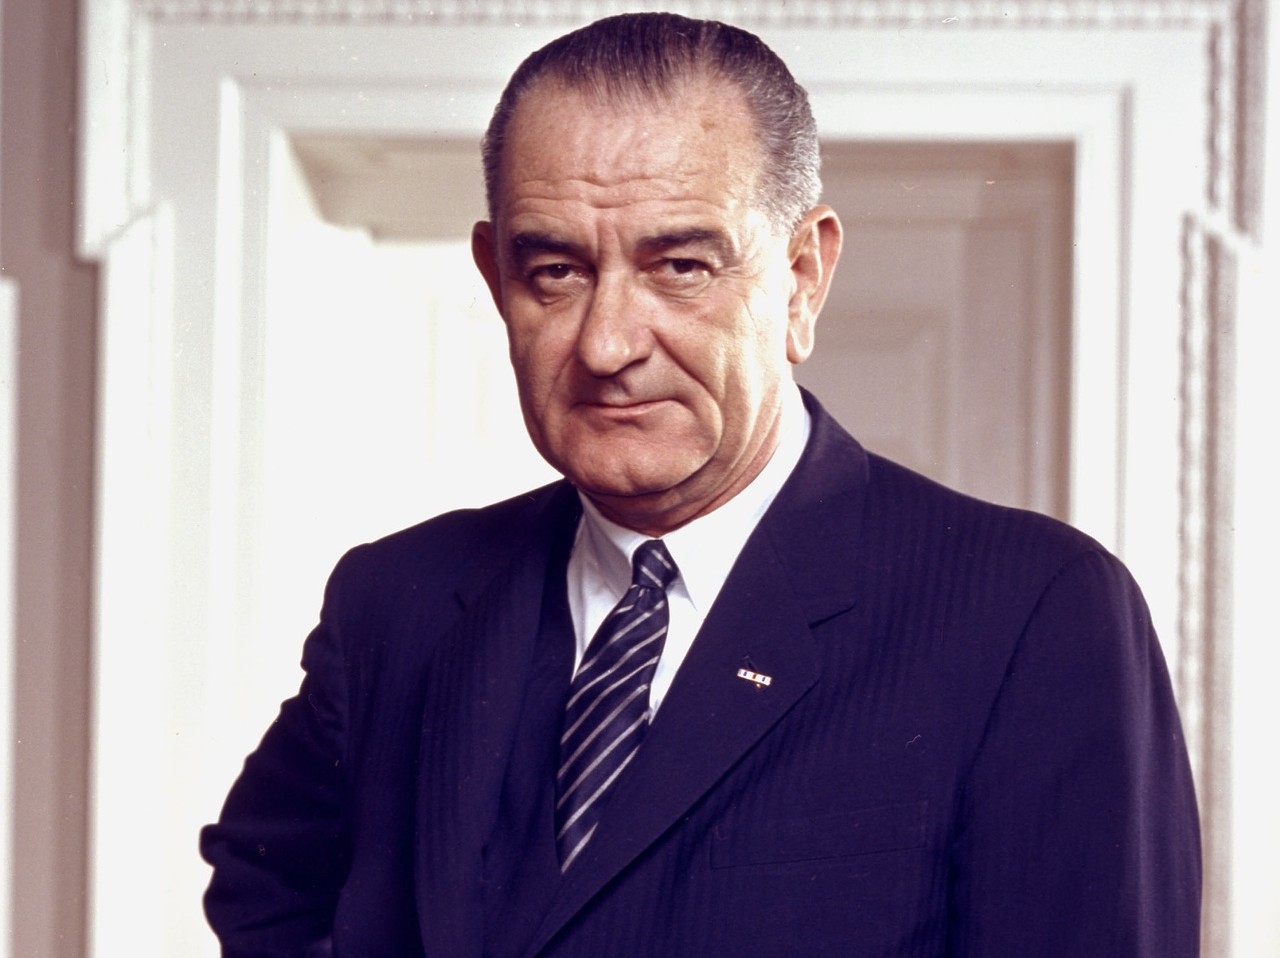 Lyndon Baines Johnson
Lyndon Baines Johnson, the 36th president, taught school in Cotulla, a small town south of San Antonio. After his time in the White House, he retired to a ranch in Stonewall, just north of here.